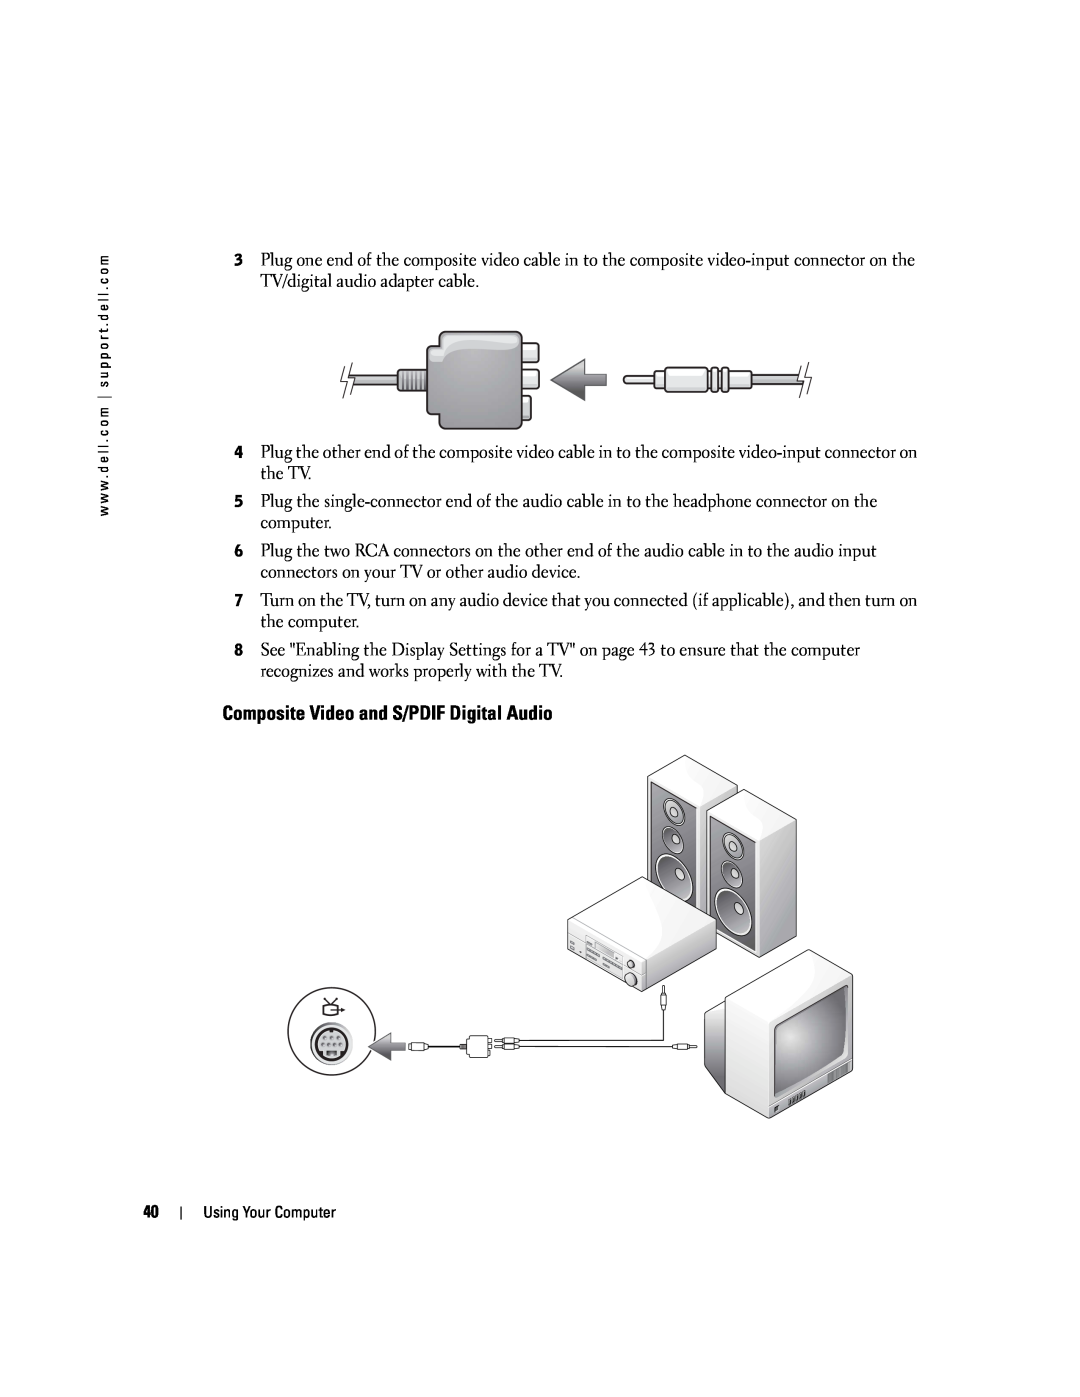 Dell PP09L owner manual Composite Video and S/PDIF Digital Audio, Using Your Computer 